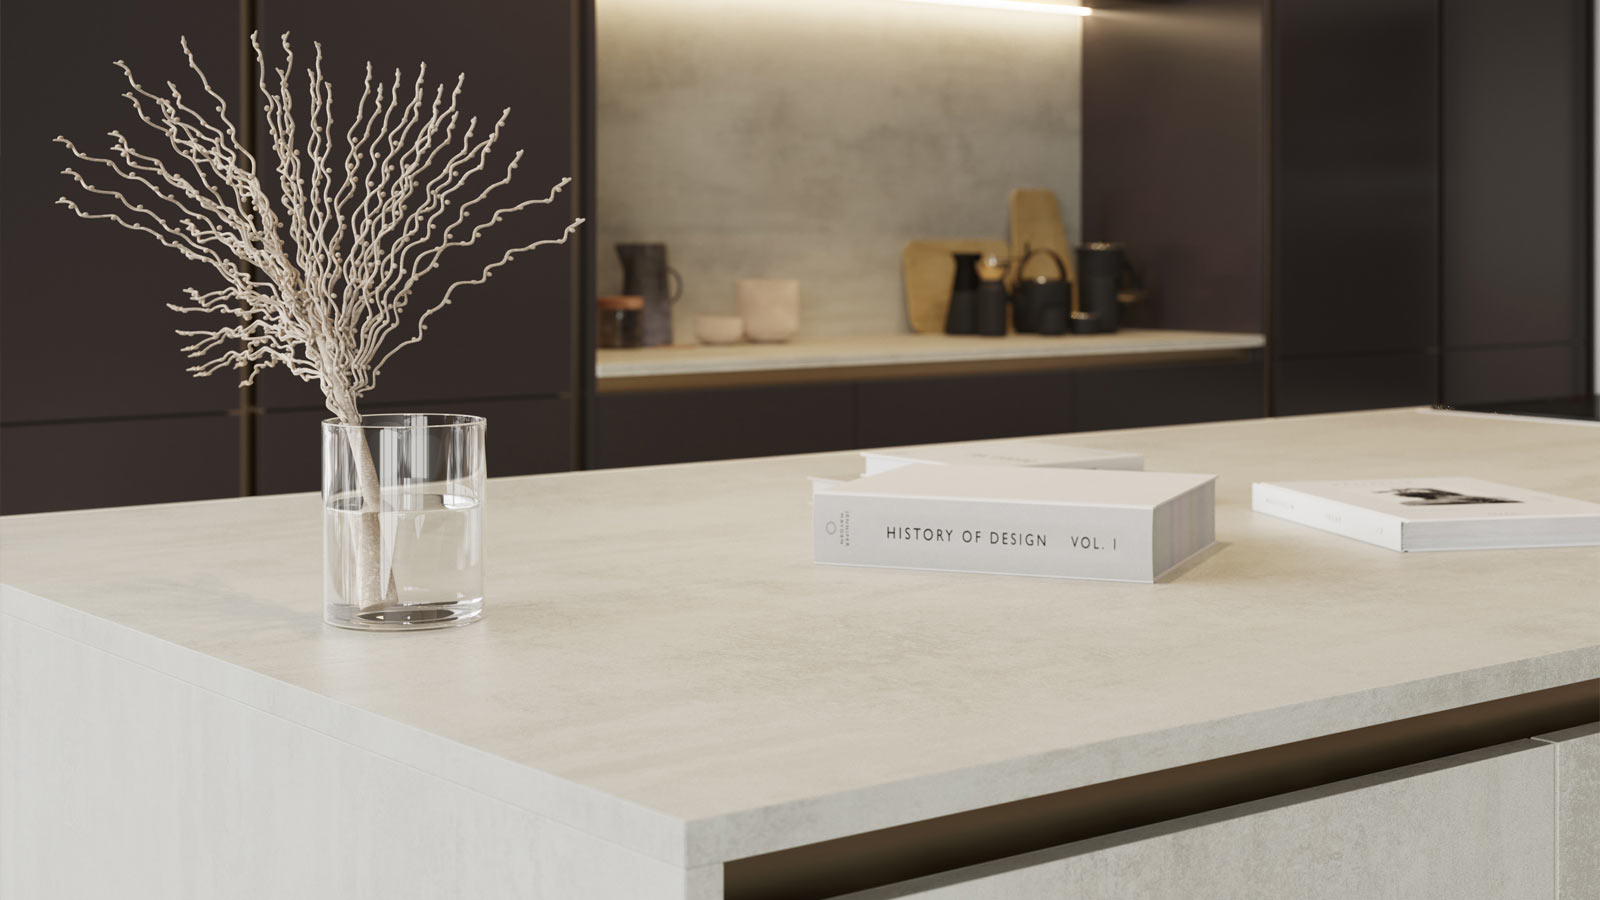 A soft minimalist, white stone-effect kitchen island unit with coffee table books